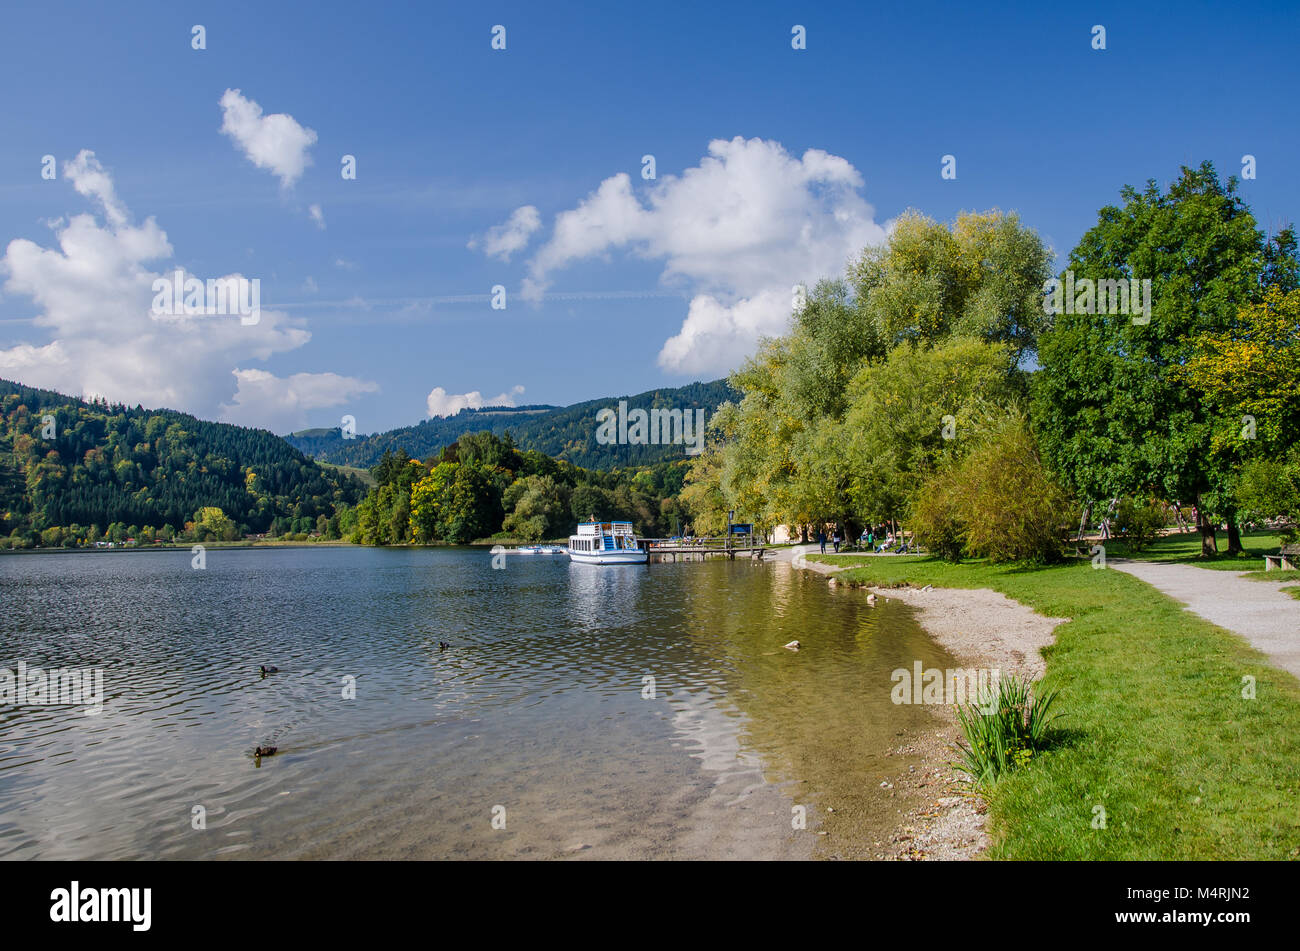 At Schliersee, one can explore the lake from a boat, which is great fun in summer. Stock Photo